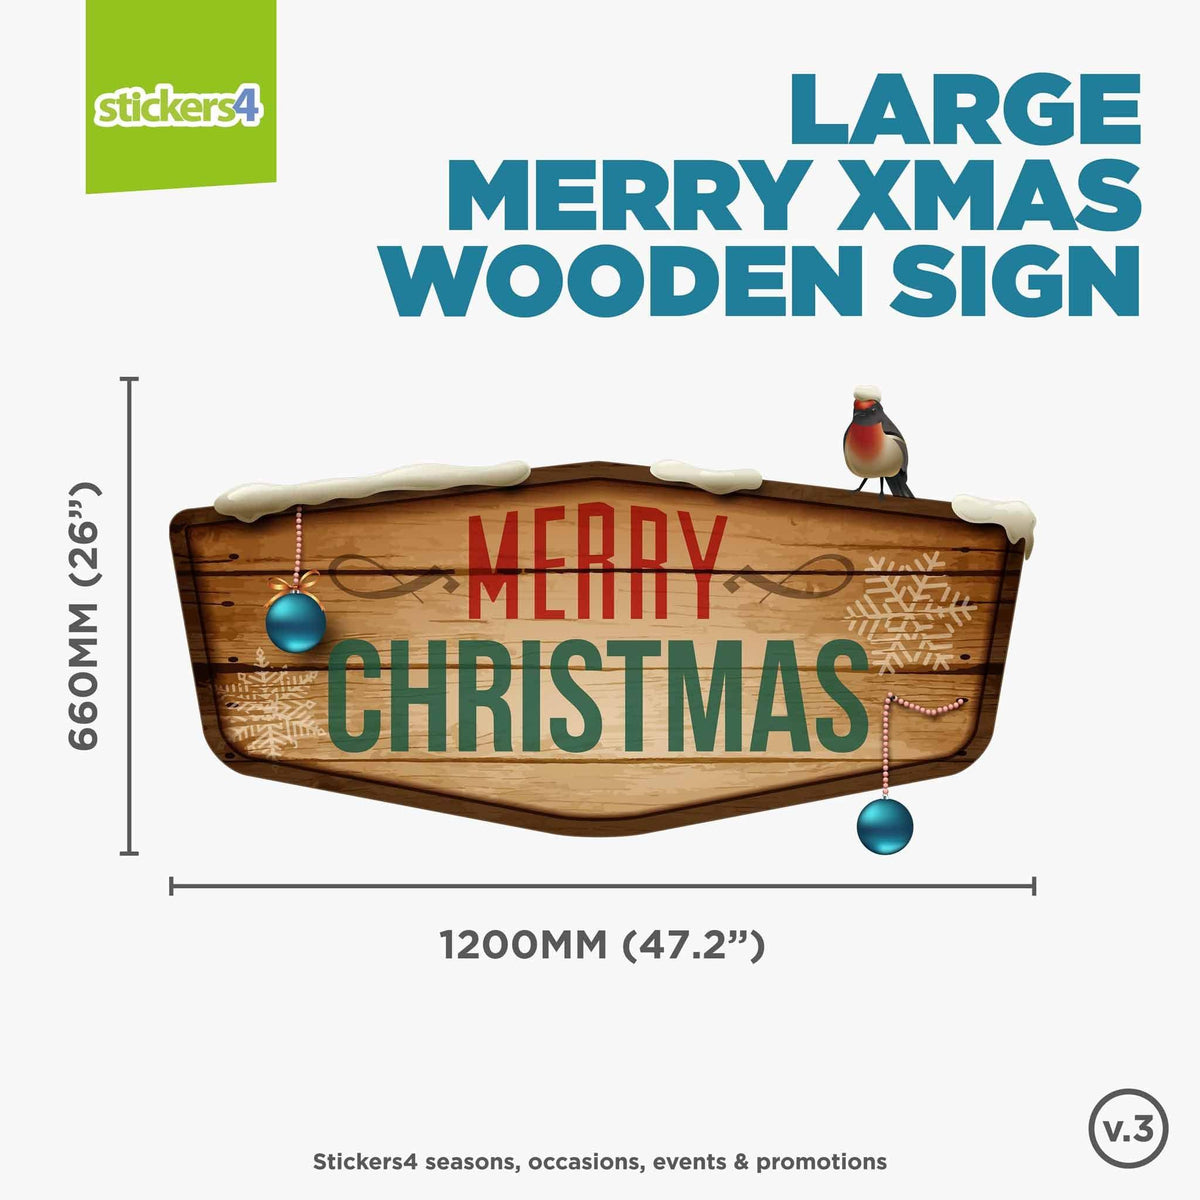 Merry Christmas Wooden Effect Vintage Sign Christmas Window Display